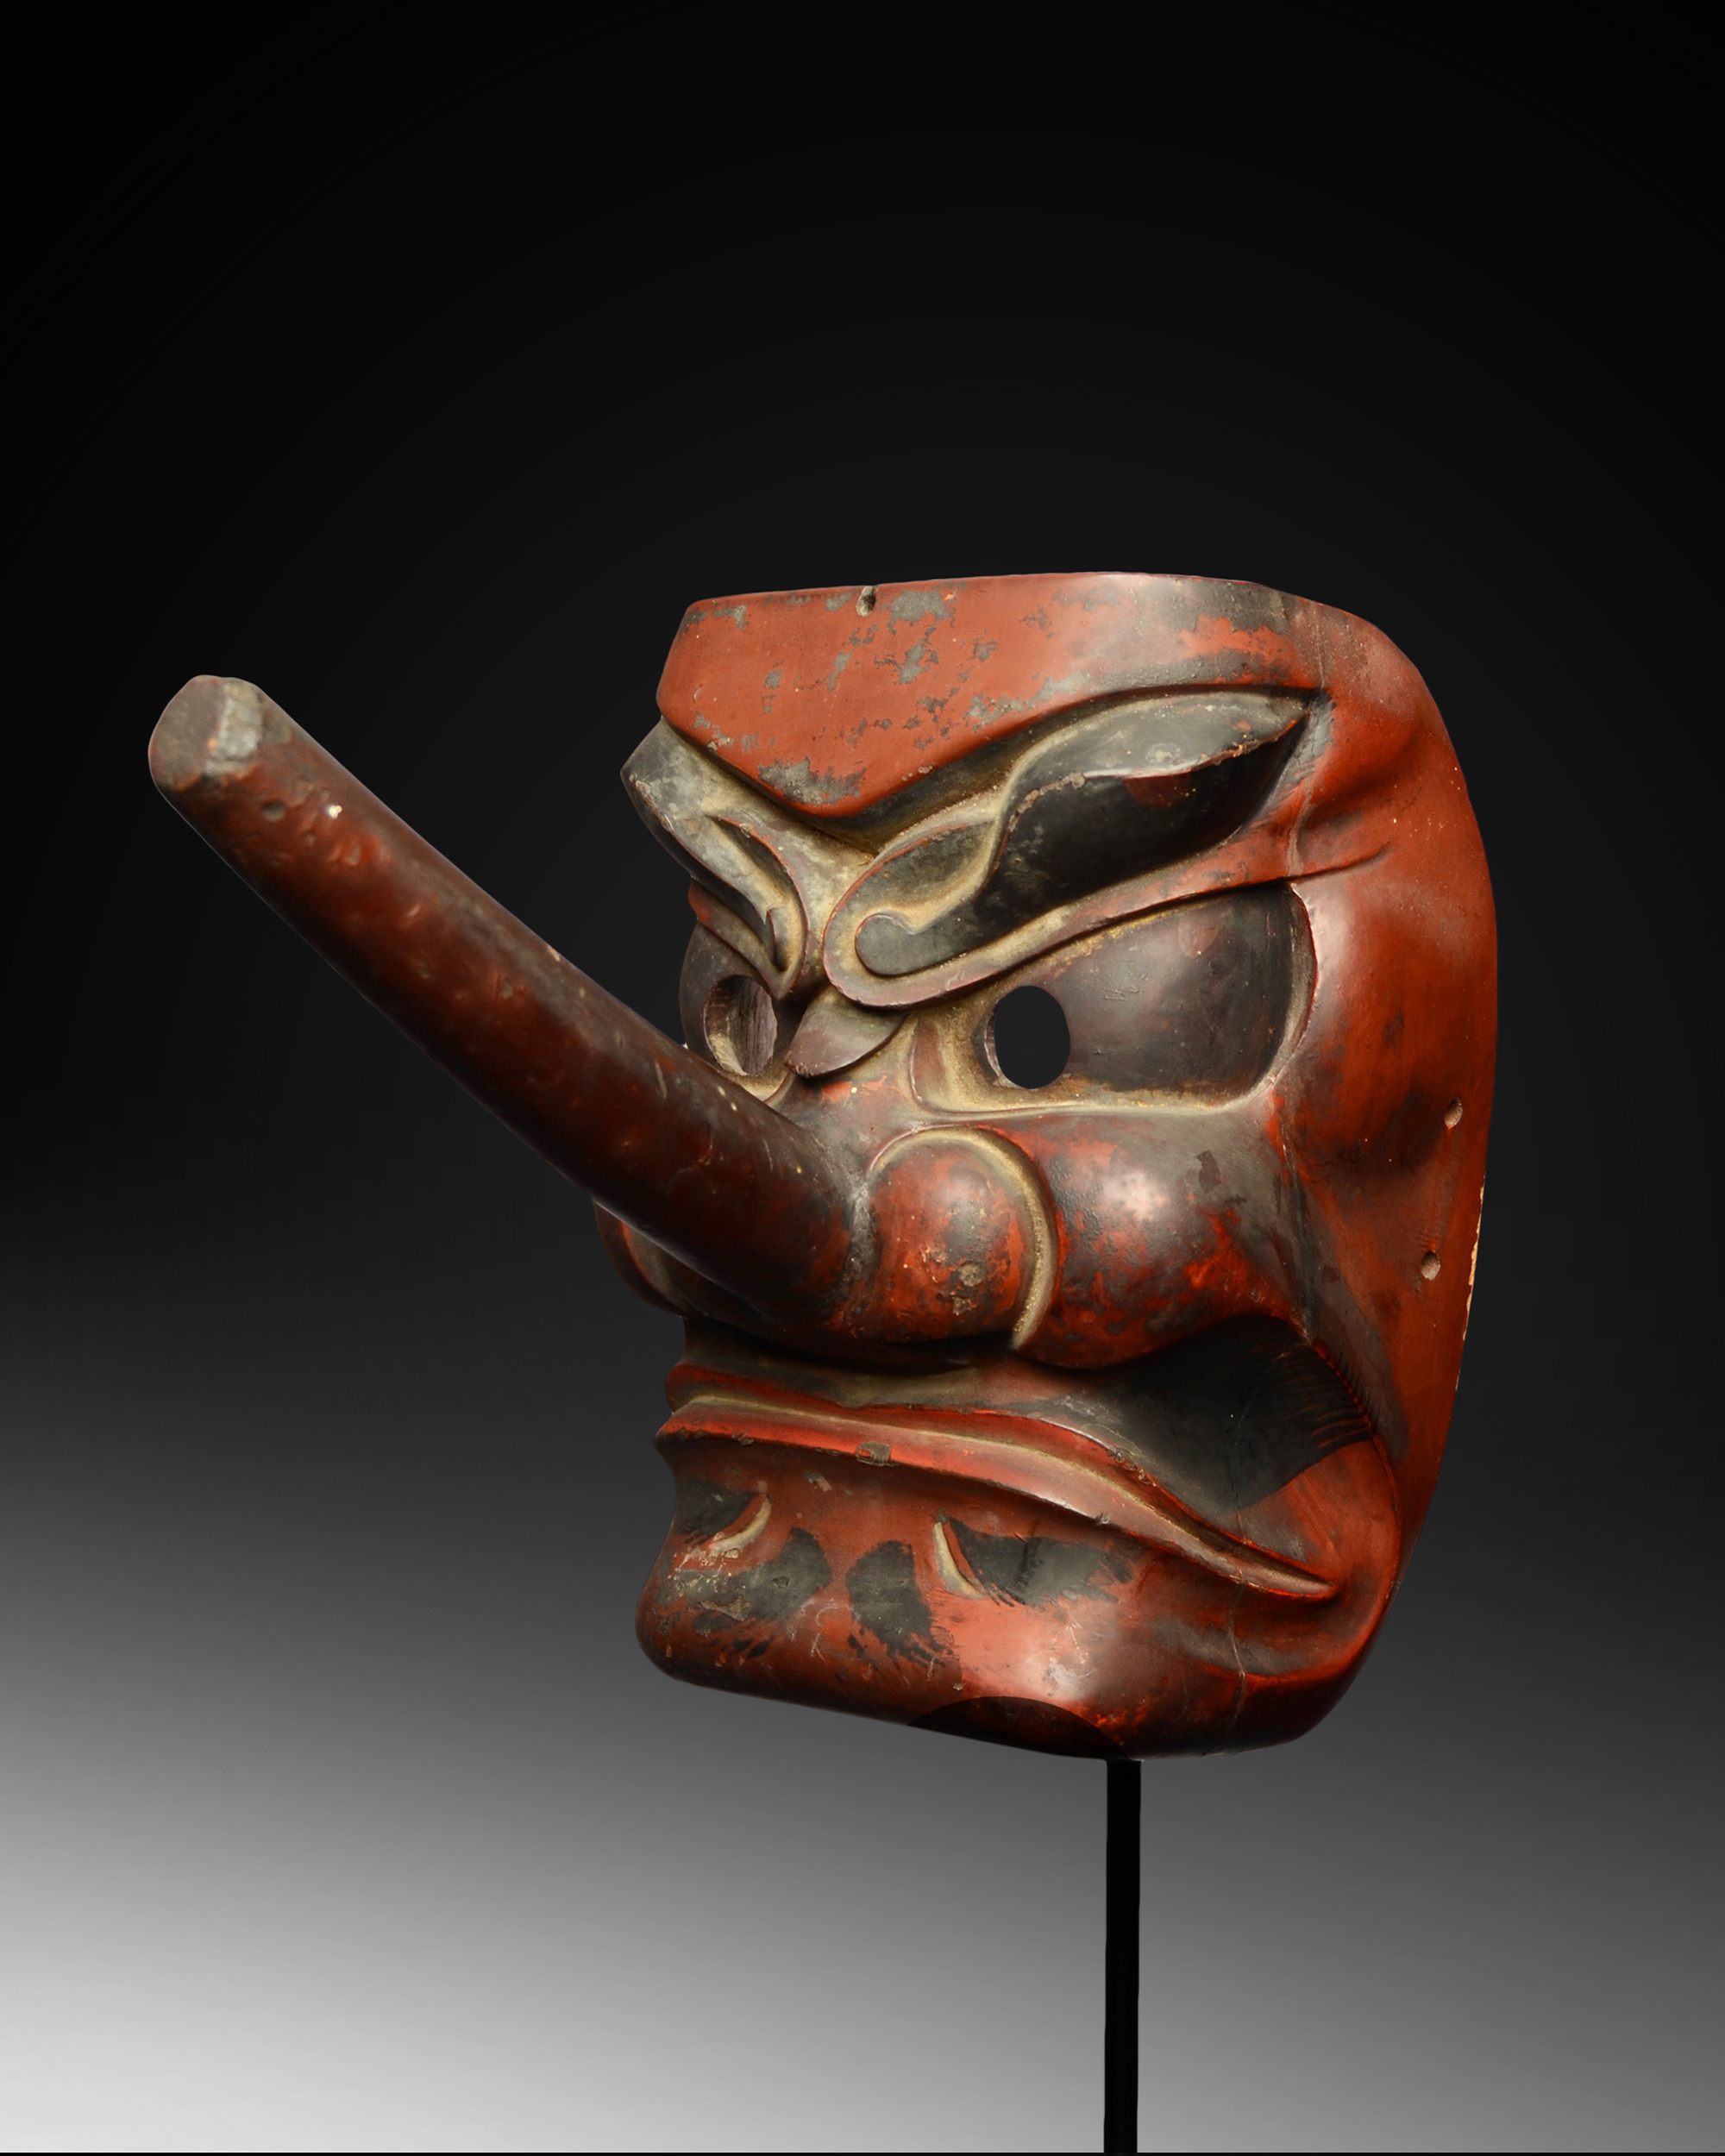 A Fine Old Japanese Tengu Mask from the late 19th Century Signed by Artist 